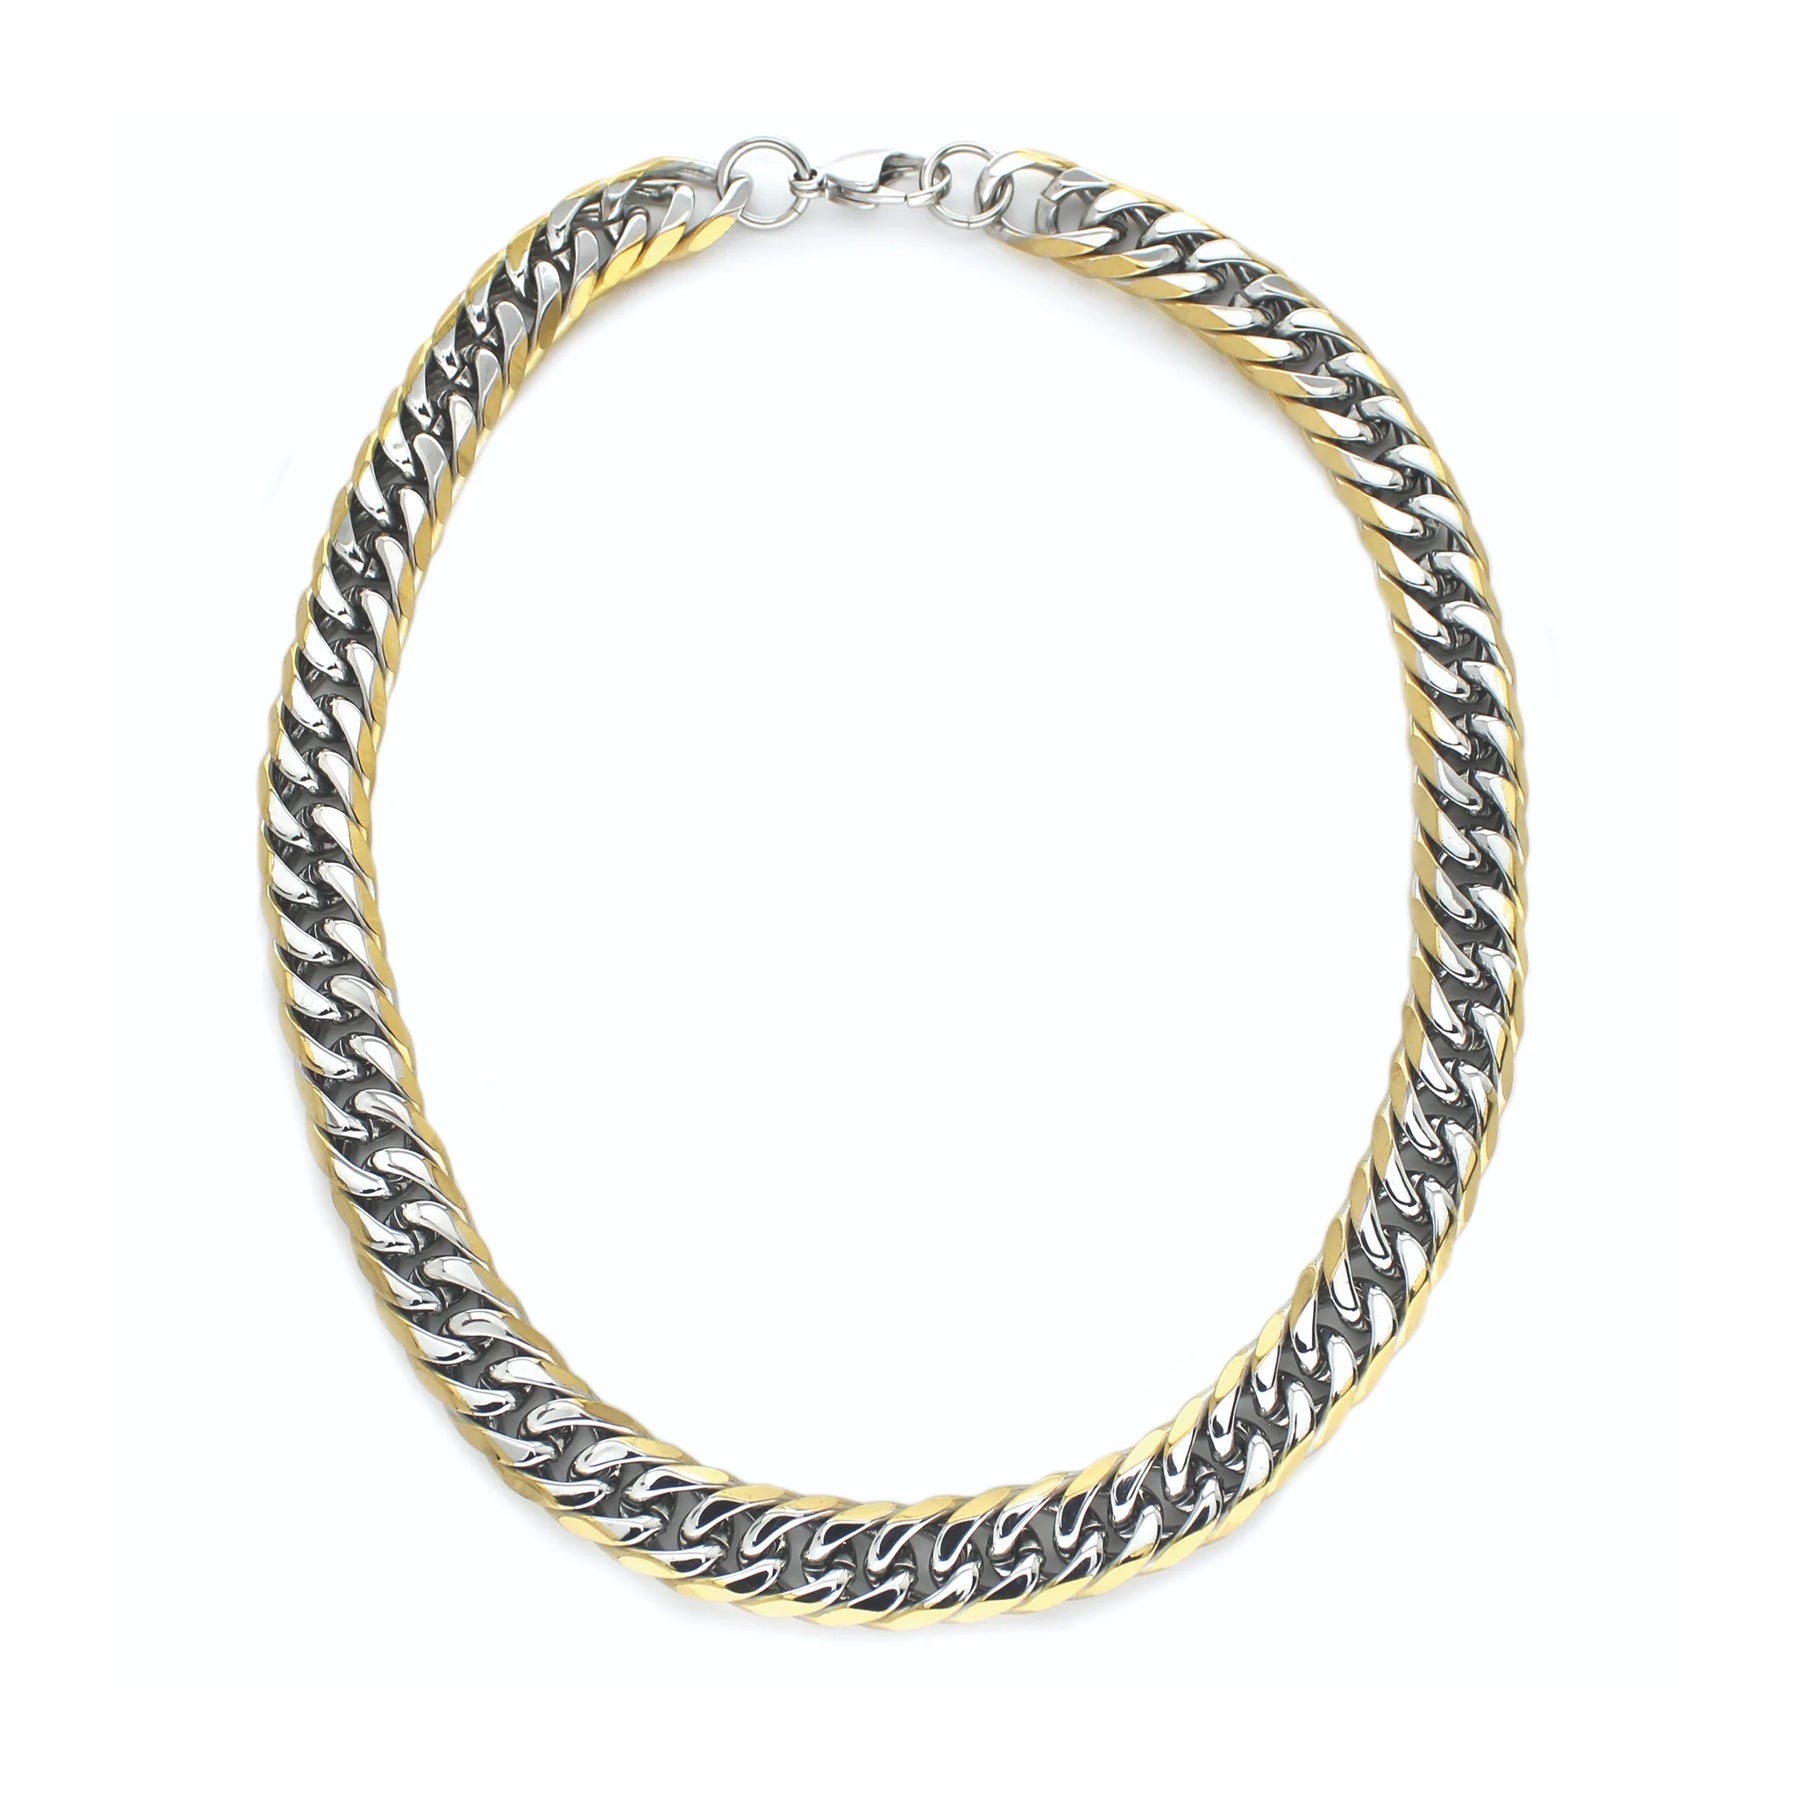 Two Tone Snake Chain Half Gold Half Silver Chain Gold and Silver Necklace  Mixed Metal Chain Water Safe 